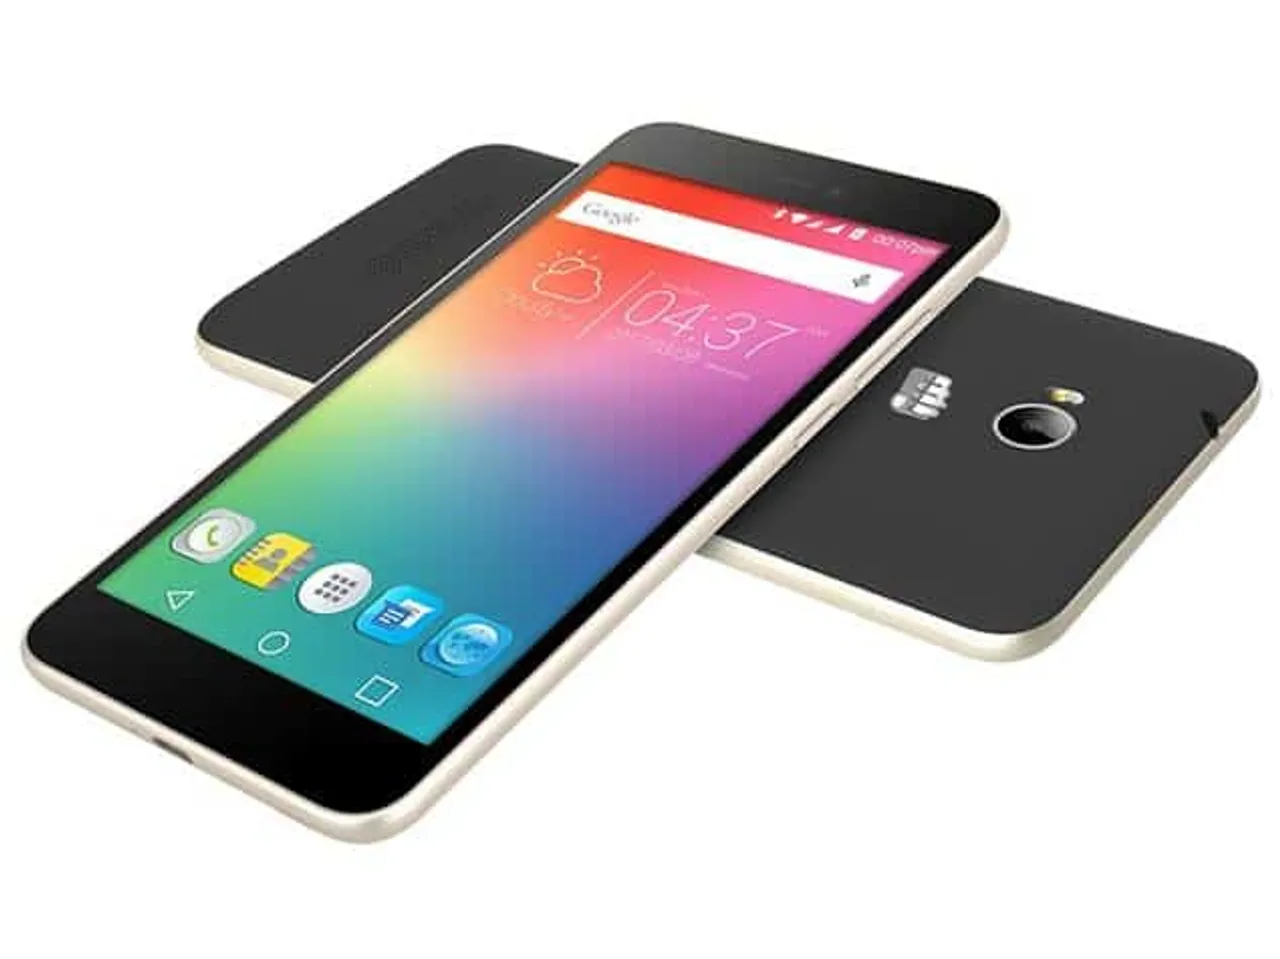 Micromax Canvas Spark 3: A Well-Designed, Affordable Smartphone